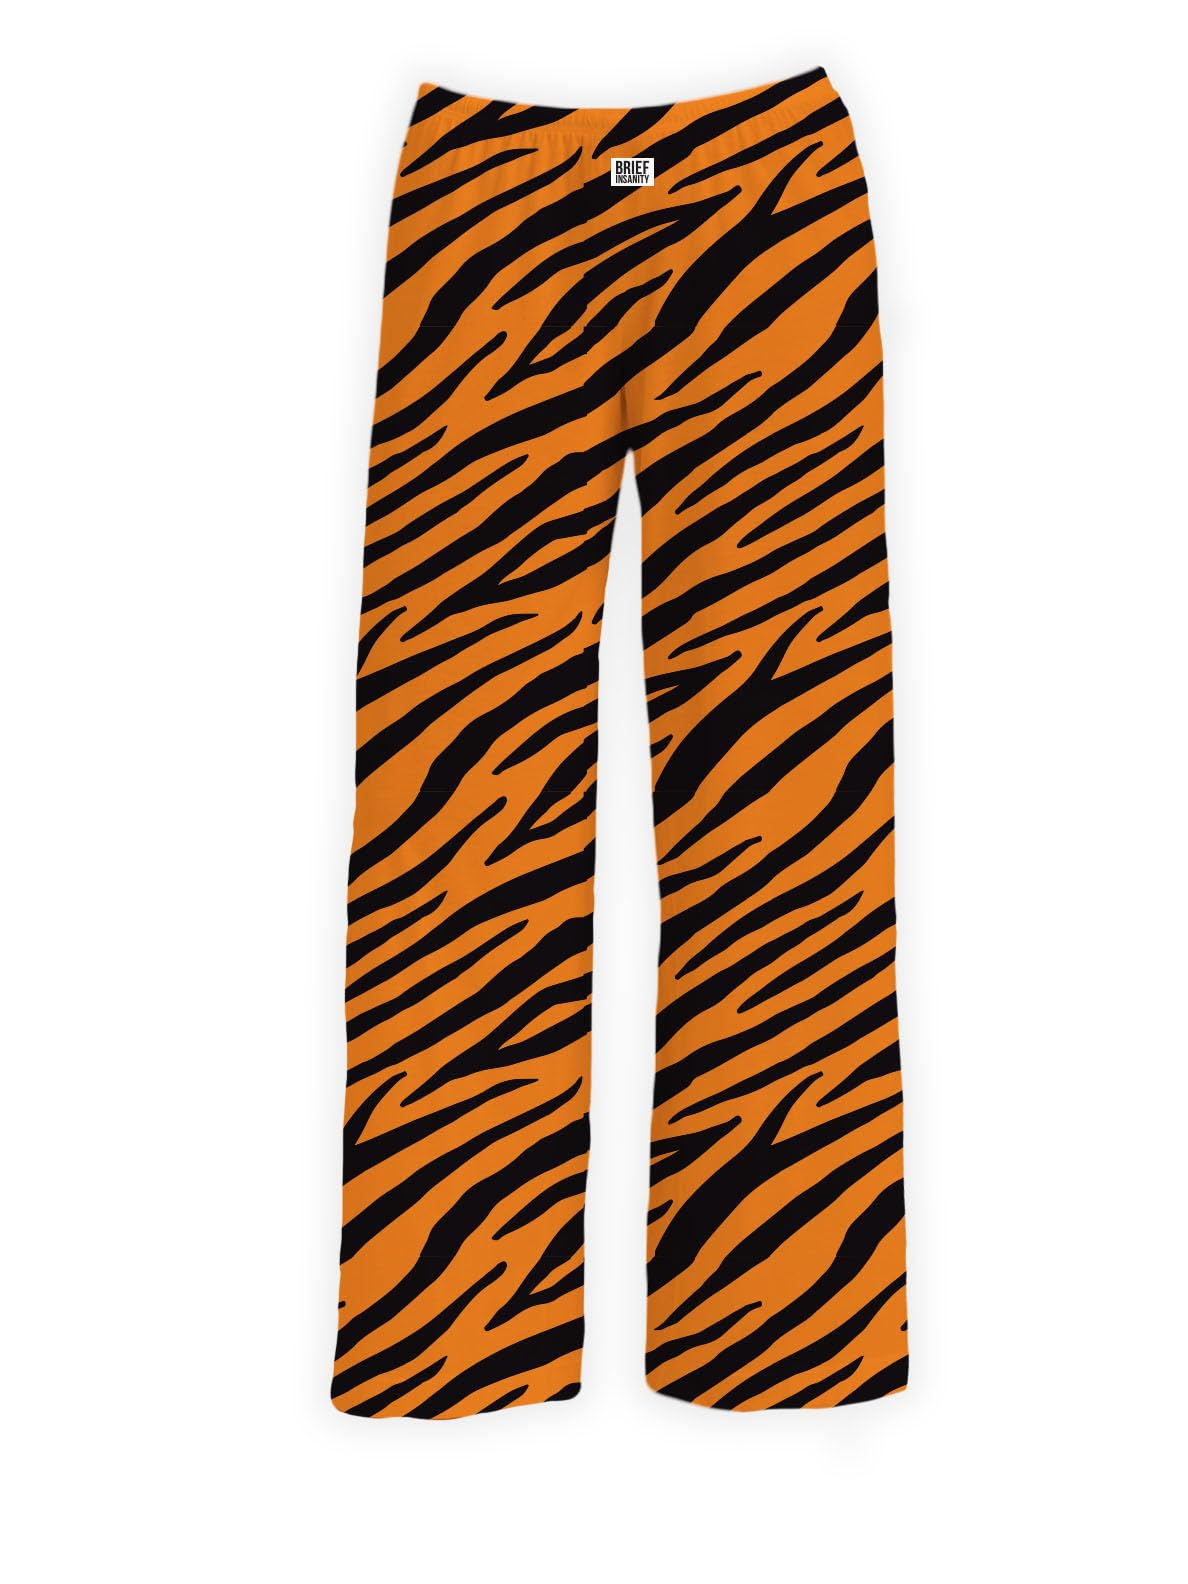 BRIEF INSANITY Tiger Lounge Pants